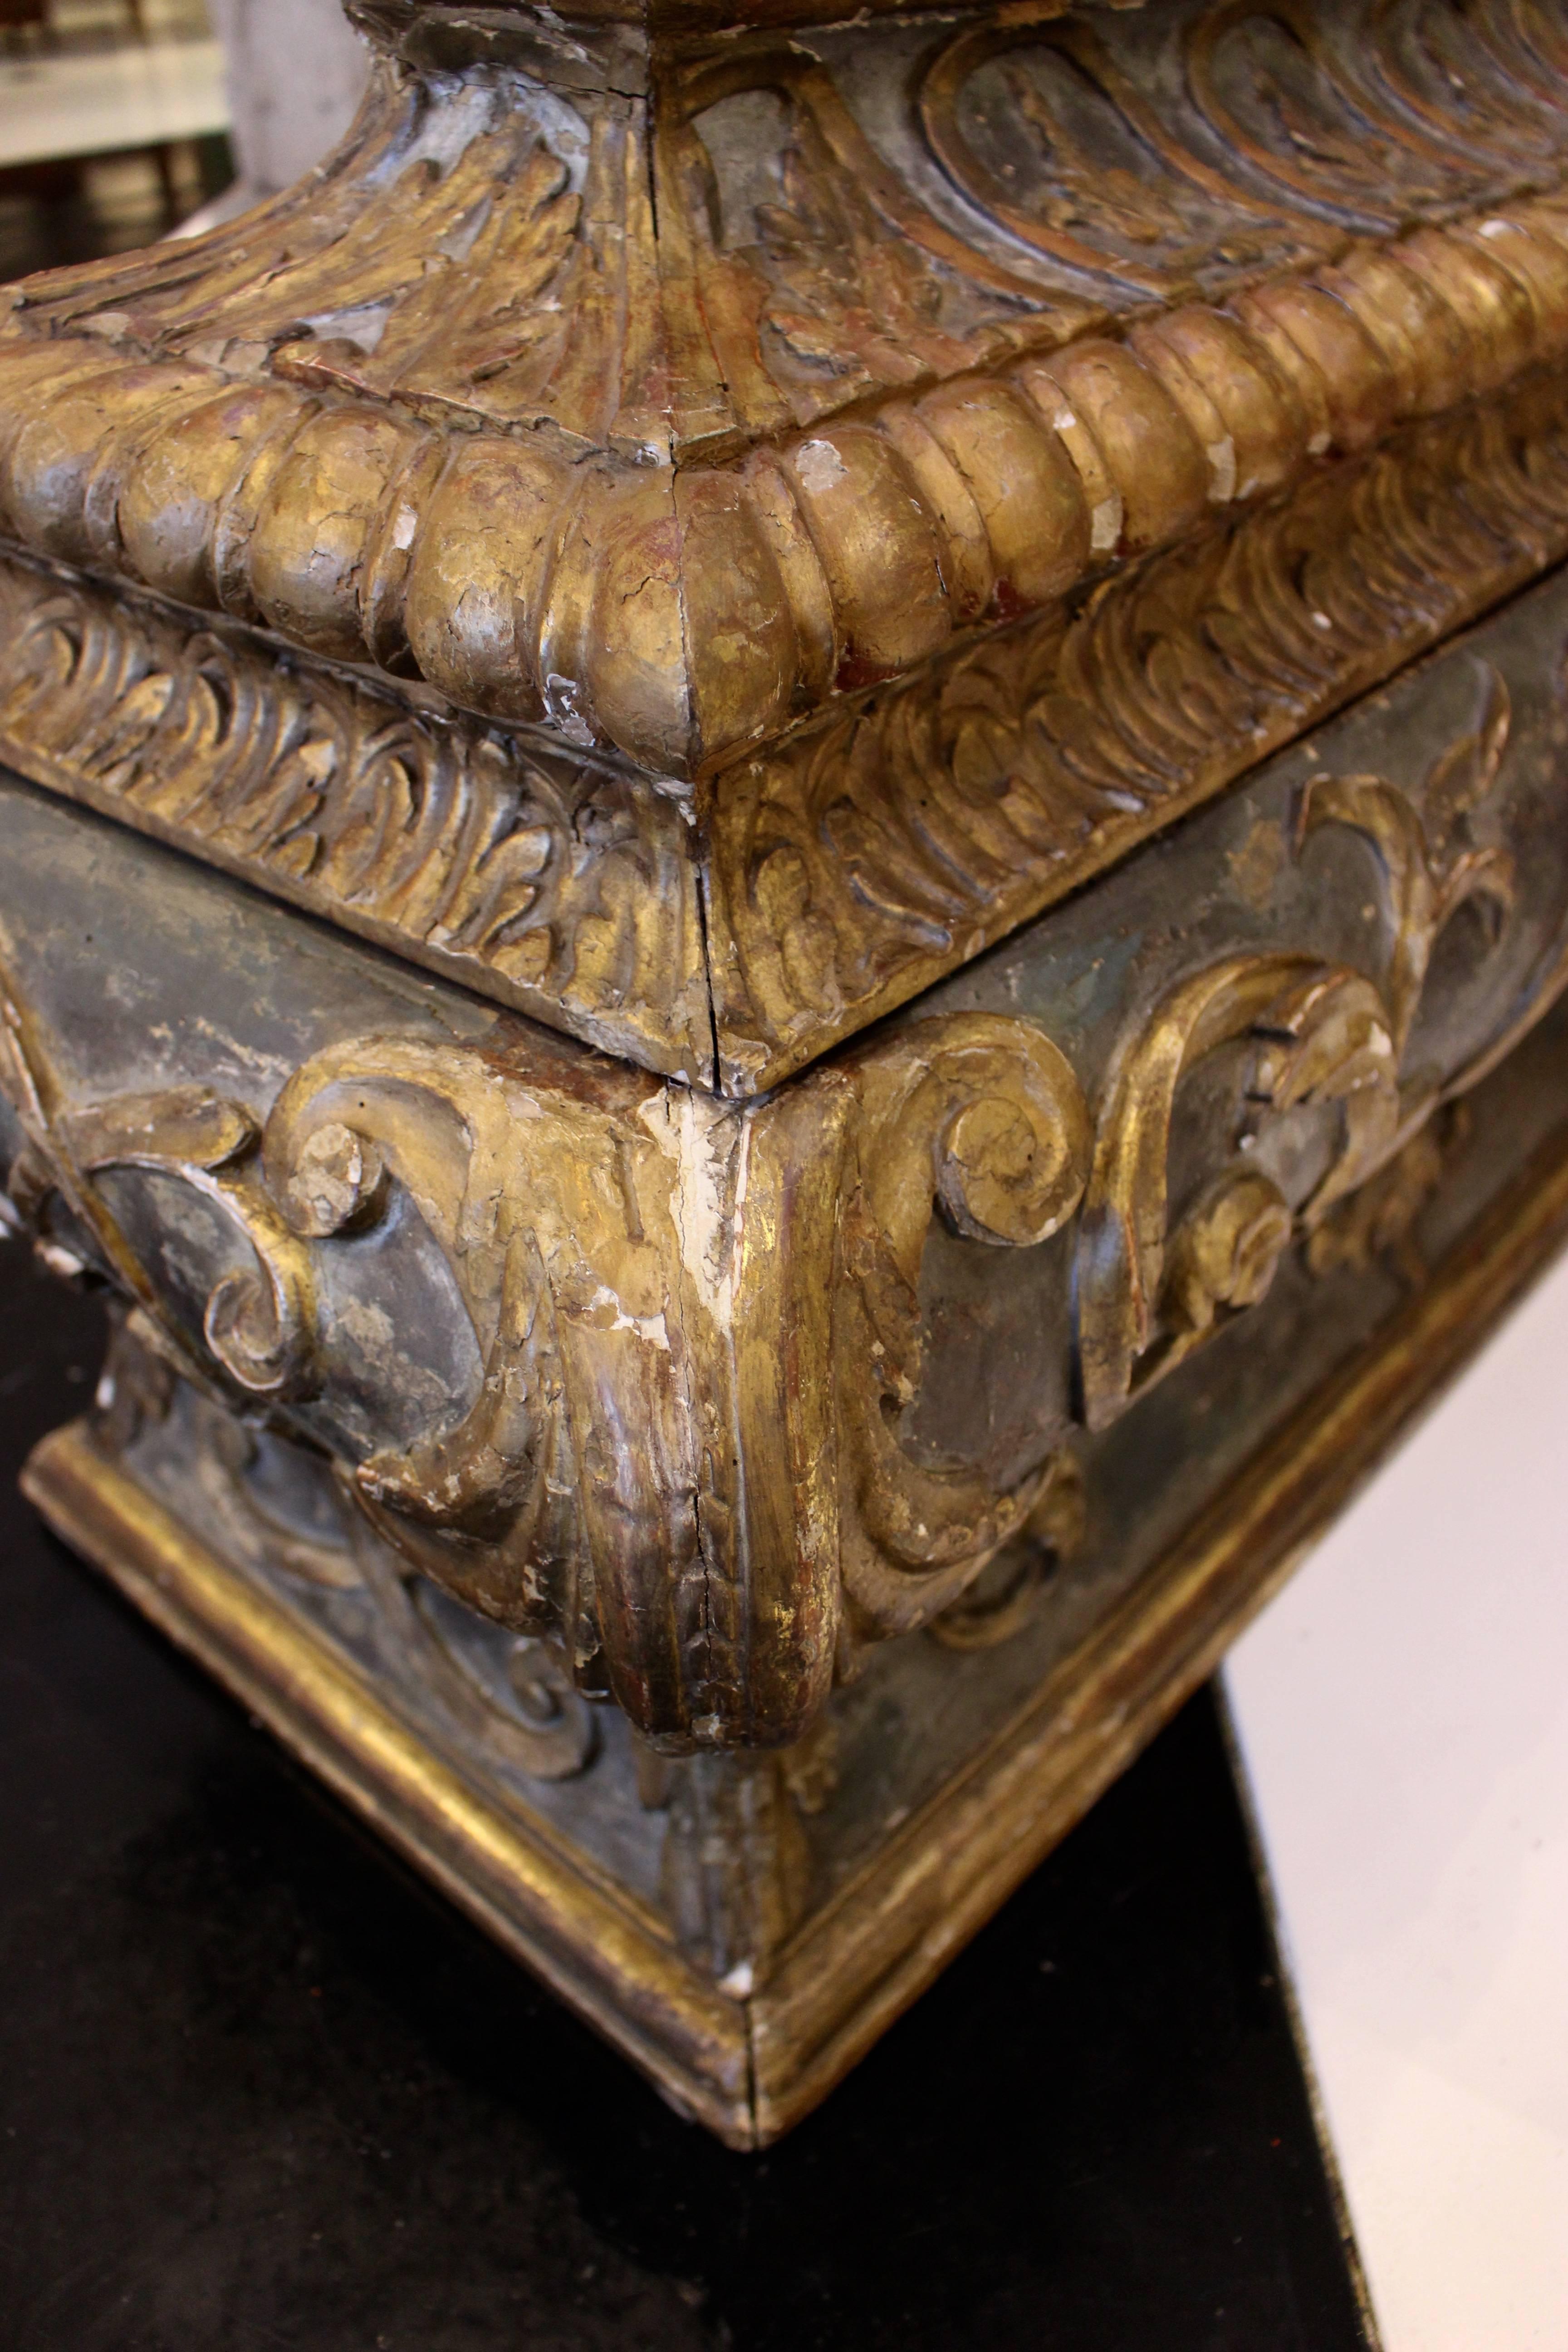 18th Century Italian Wooden Carved Sarcophagus-Shaped Chest with Reliquary In Good Condition For Sale In Palm Desert, CA